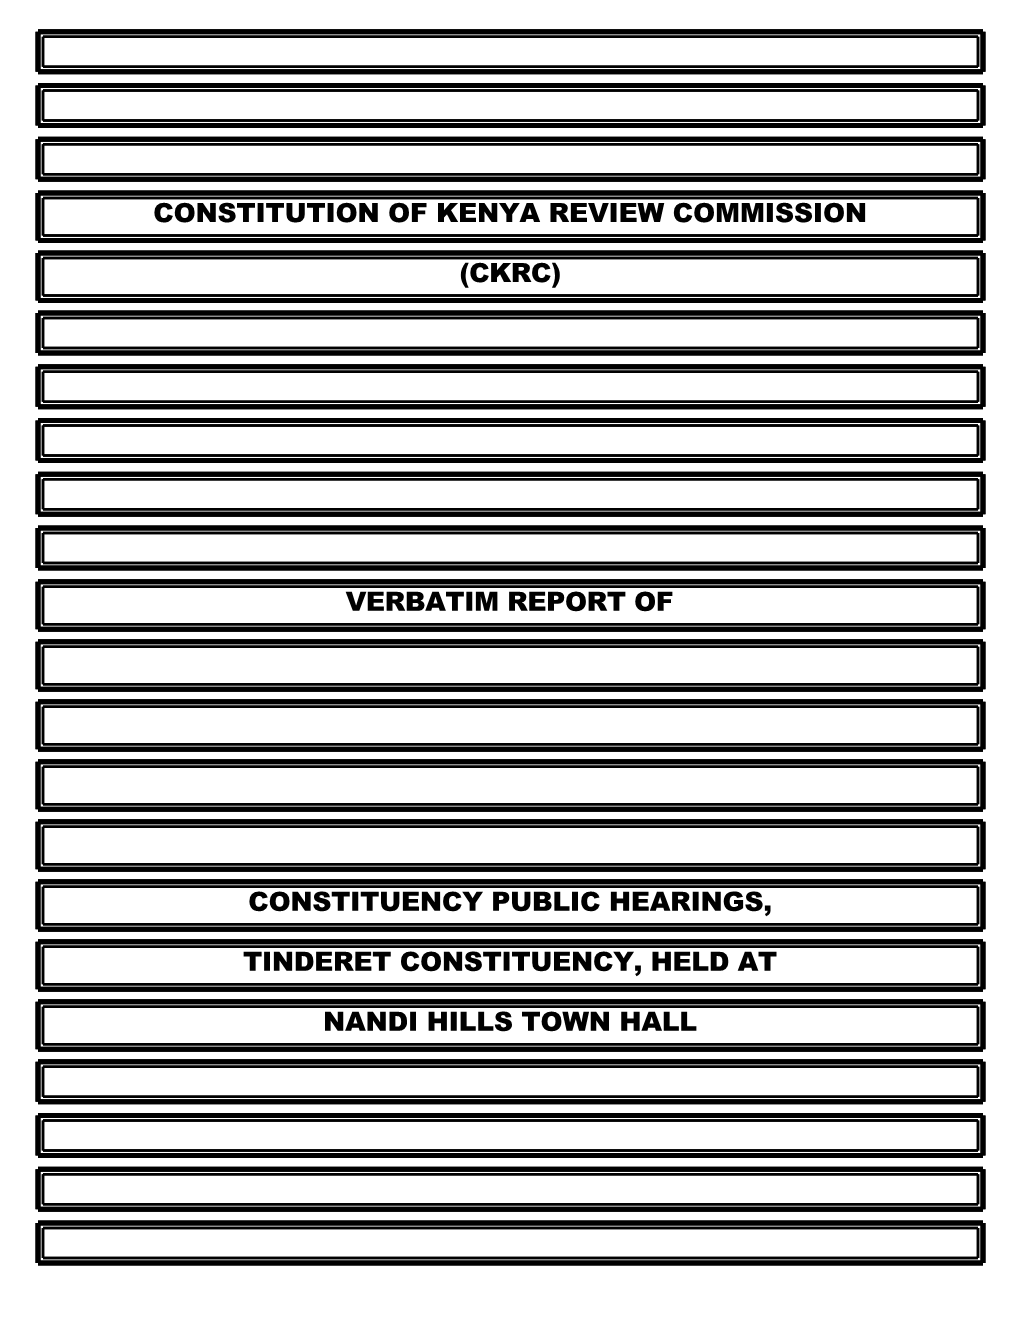 Constitution of Kenya Review Commission